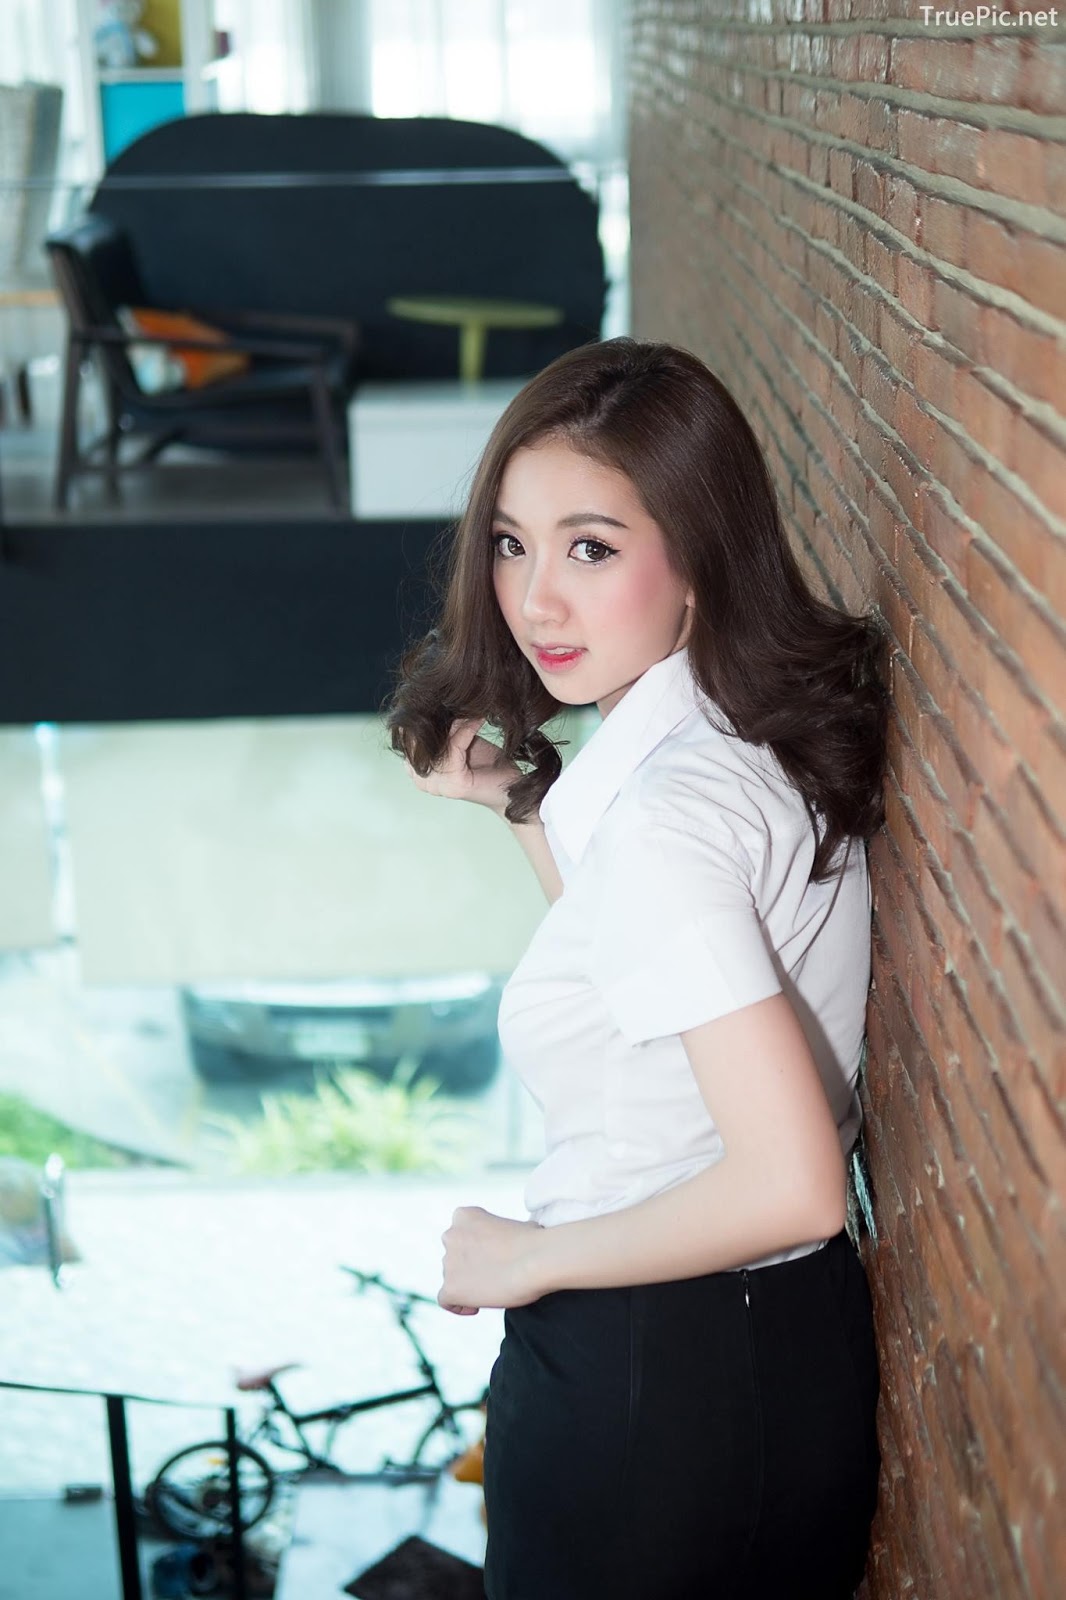 Thailand model - Yingaon Duangporn - Concept The Beautiful Office Girl - Picture 24